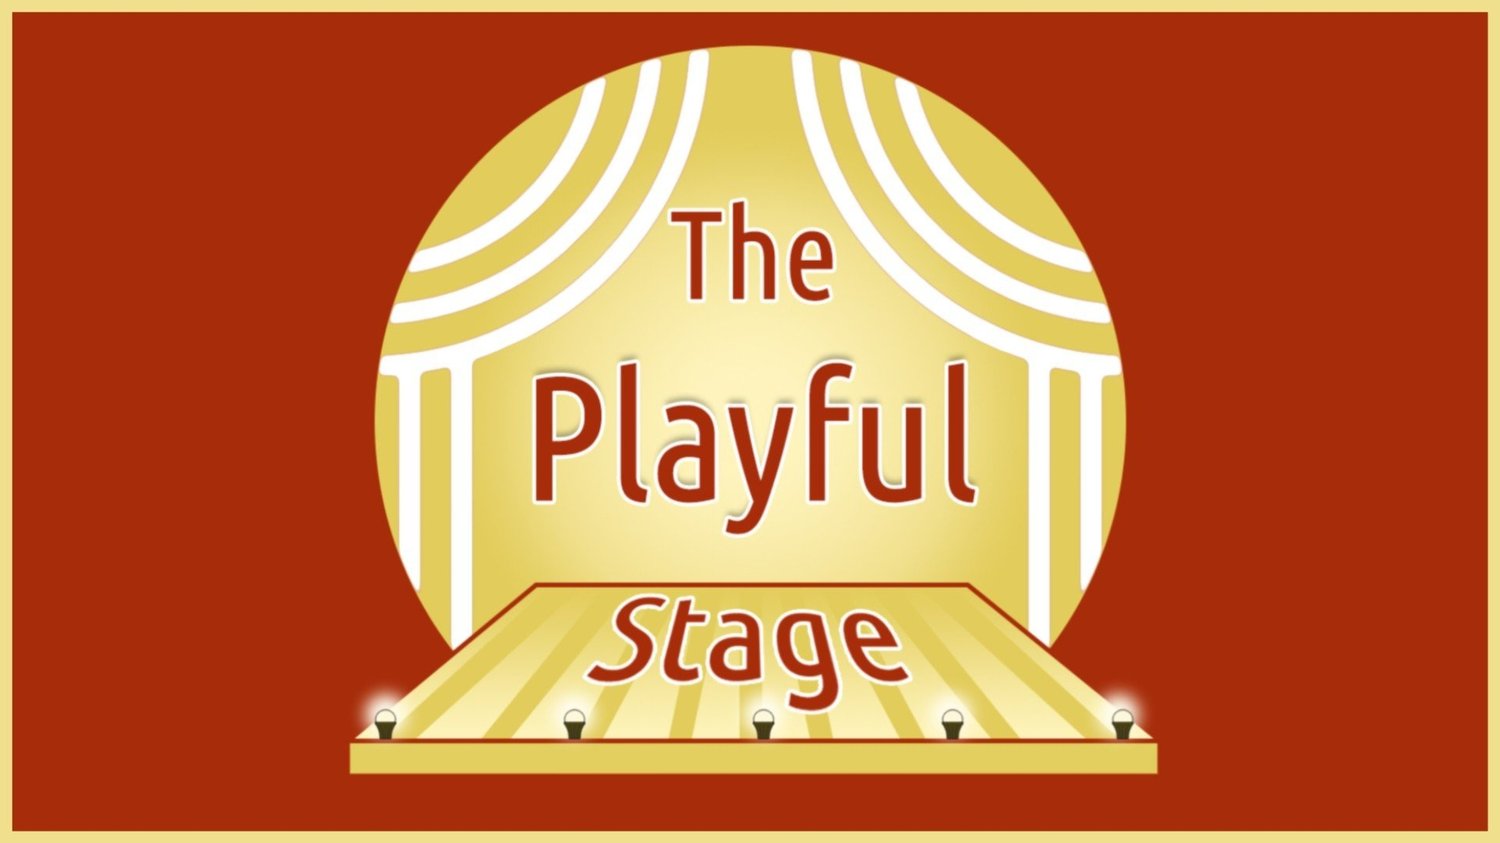 The Playful Stage